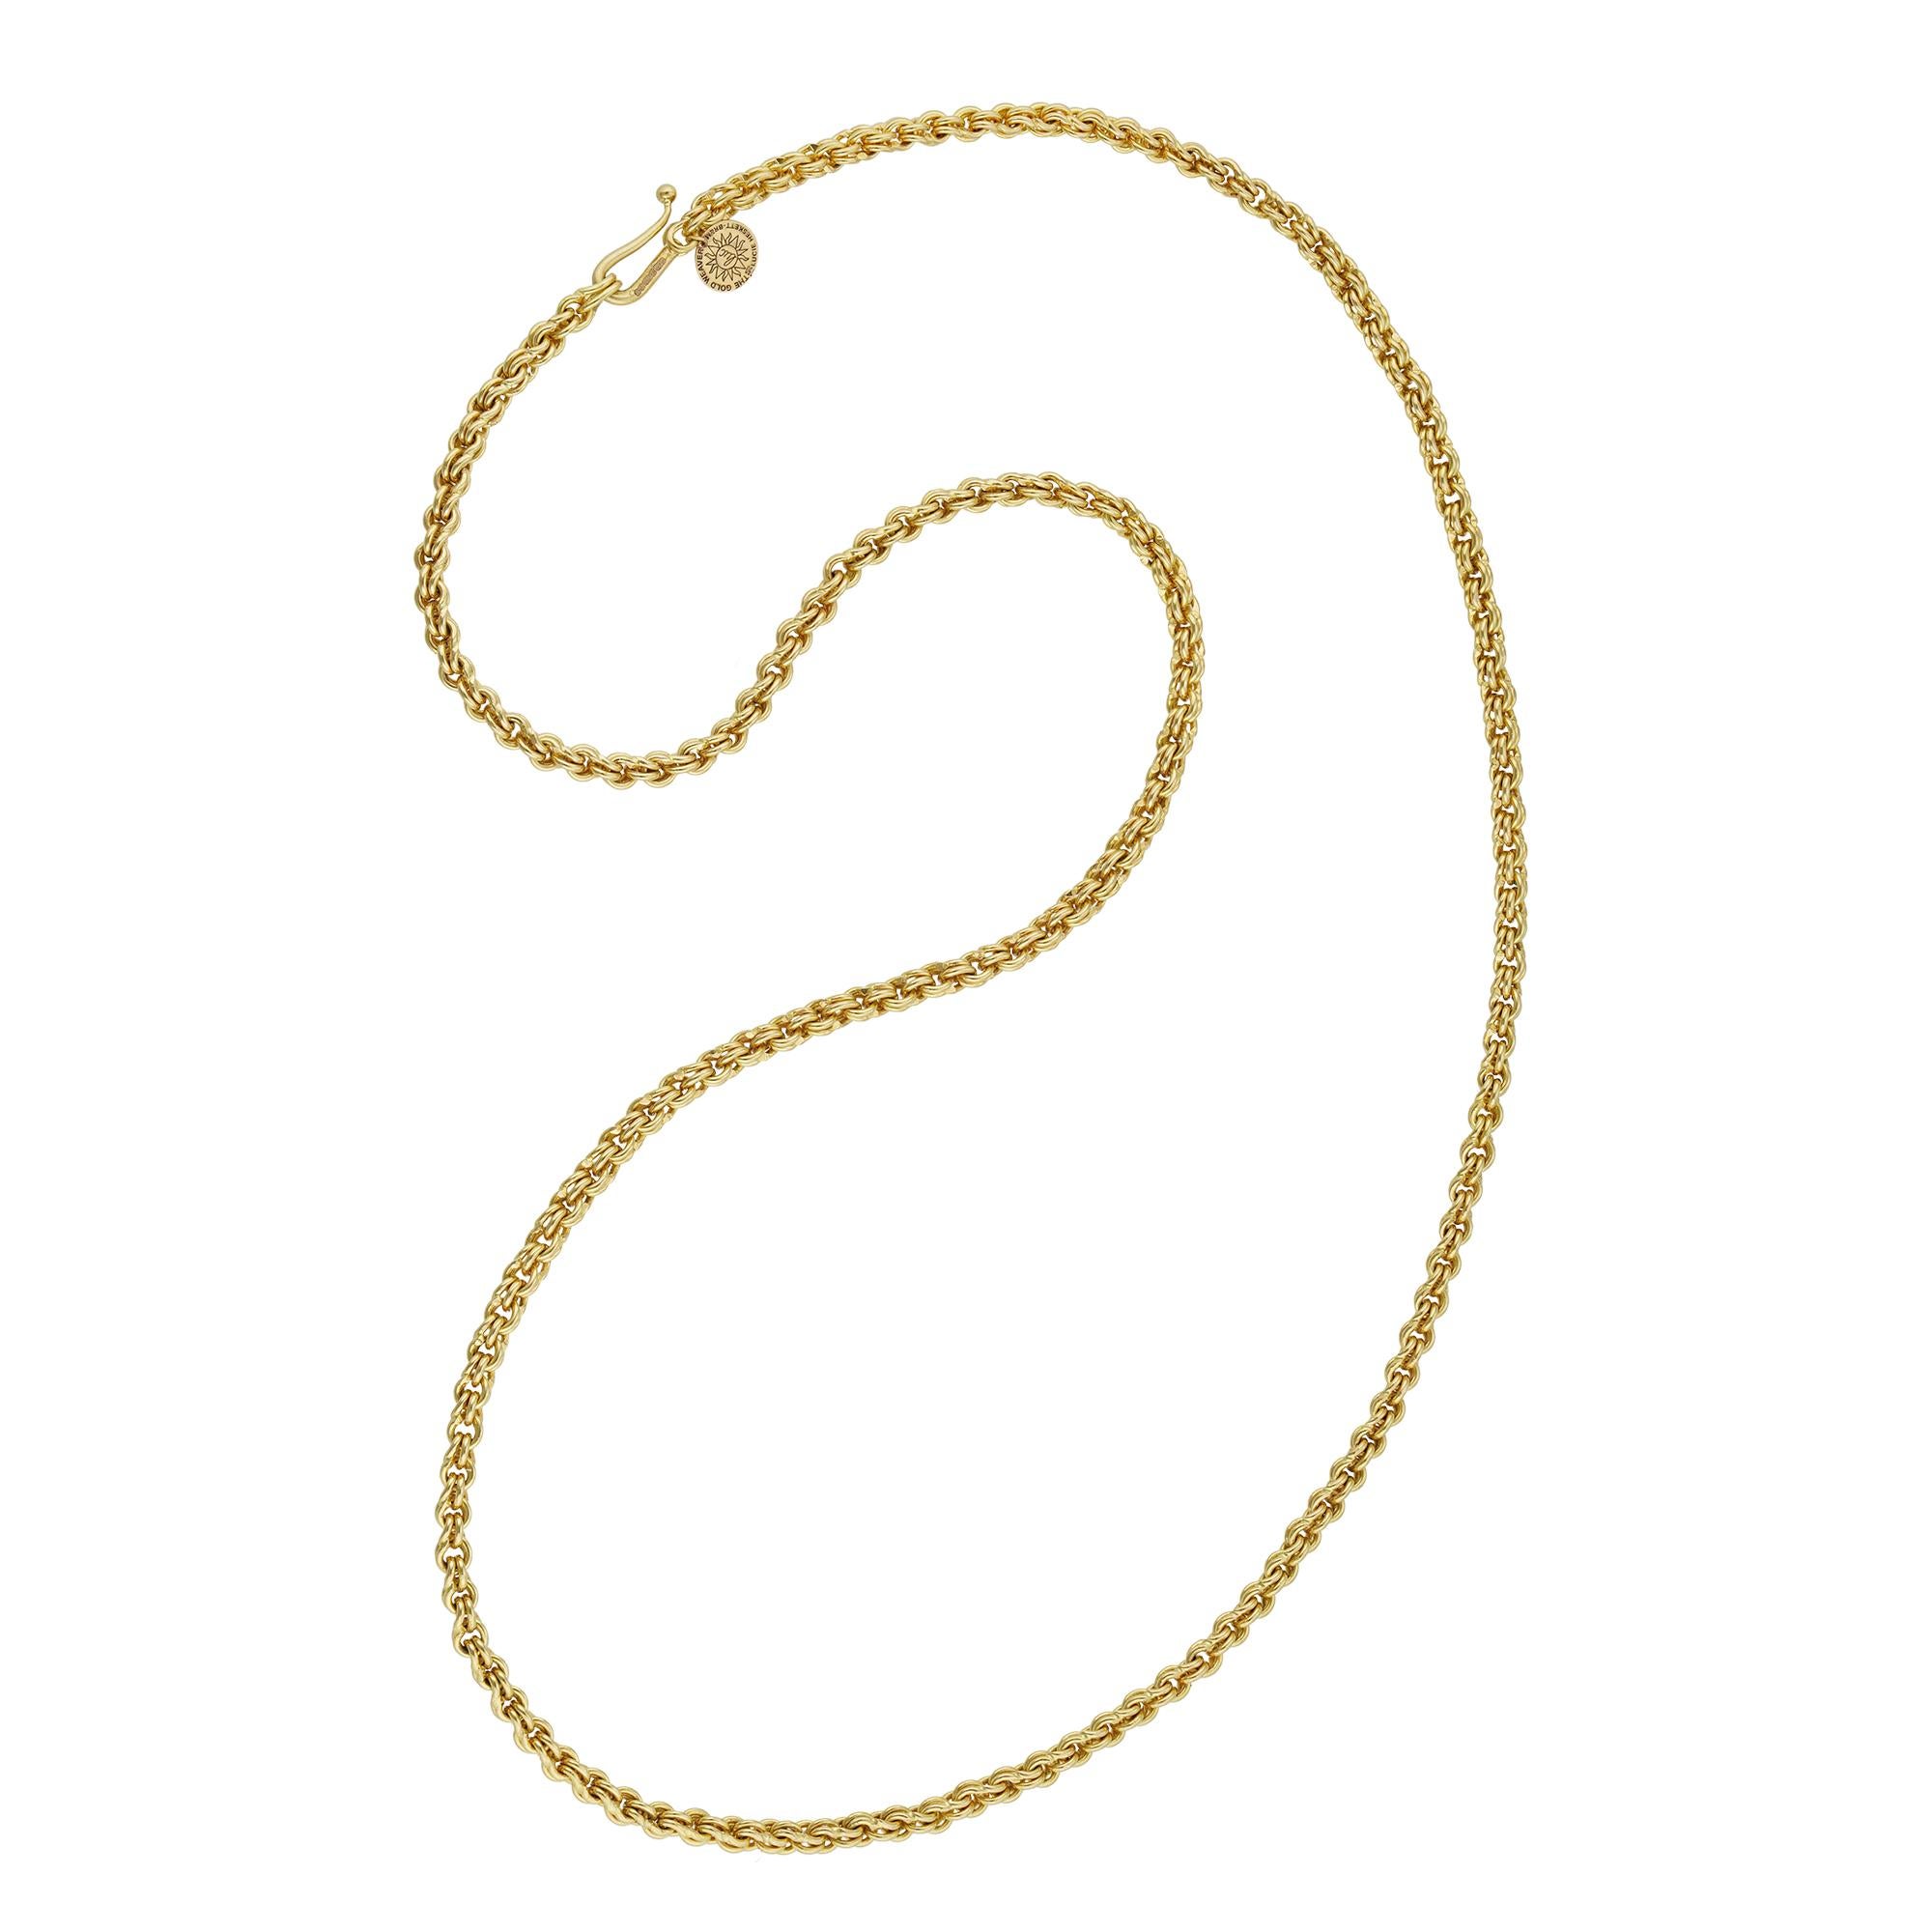 A handmade gold Little Minstrel chain by Lucie Heskett-Brem, the Gold Weaver of Lucerne, made in yellow gold with hook clasp, hallmarked 18ct gold London 2021, measuring 50.5cm long and 0.3cm wide,  gross weight 23.6 grams.

This chain is new.

A